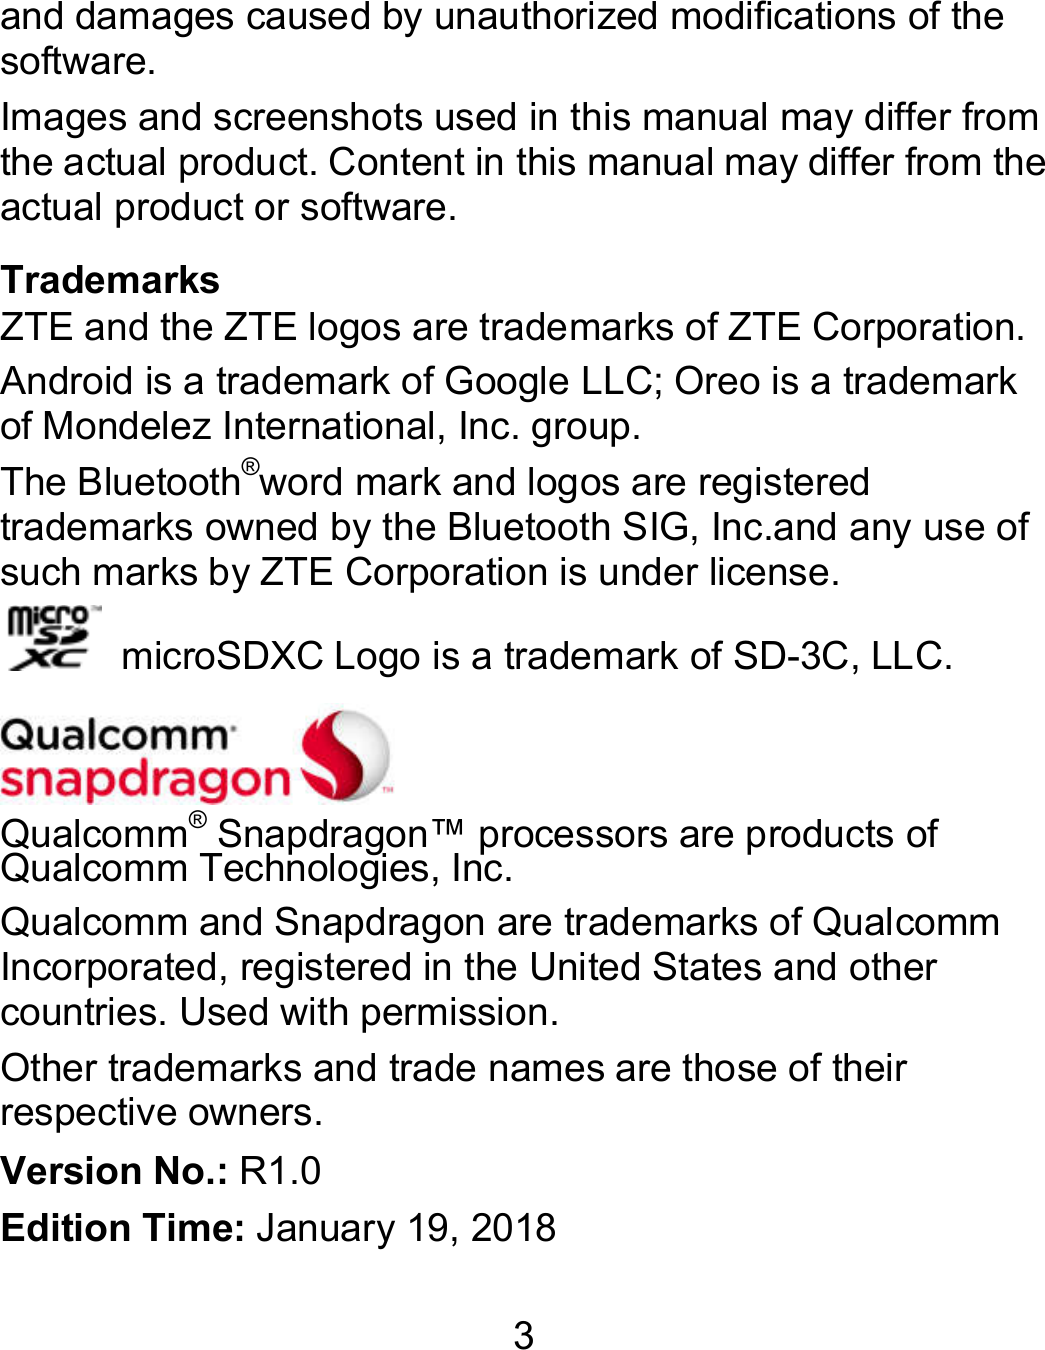 3 and damages caused by unauthorized modifications of the software. Images and screenshots used in this manual may differ from the actual product. Content in this manual may differ from the actual product or software. Trademarks ZTE and the ZTE logos are trademarks of ZTE Corporation. Android is a trademark of Google LLC; Oreo is a trademark of Mondelez International, Inc. group. The Bluetooth®word mark and logos are registered trademarks owned by the Bluetooth SIG, Inc.and any use of such marks by ZTE Corporation is under license.     microSDXC Logo is a trademark of SD-3C, LLC.   Qualcomm® Snapdragon™ processors are products of Qualcomm Technologies, Inc.   Qualcomm and Snapdragon are trademarks of Qualcomm Incorporated, registered in the United States and other countries. Used with permission. Other trademarks and trade names are those of their respective owners. Version No.: R1.0 Edition Time: January 19, 2018 